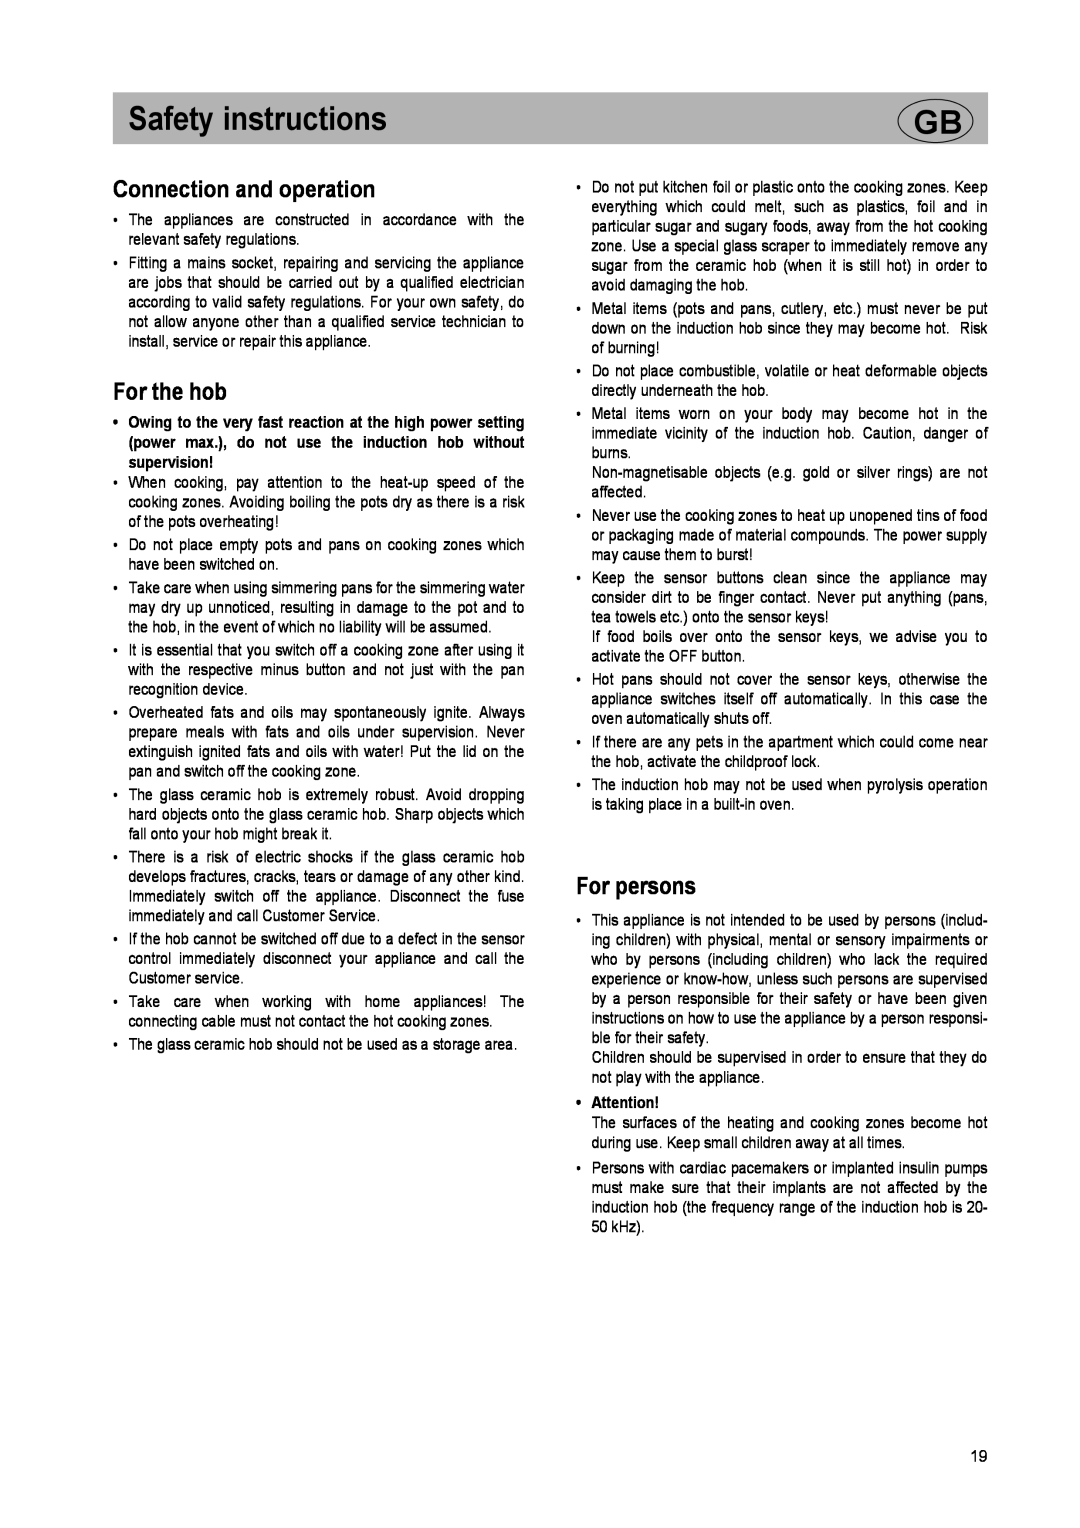 Smeg SE2642ID2 manual Safety instructions, Connection and operation, For the hob, For persons 